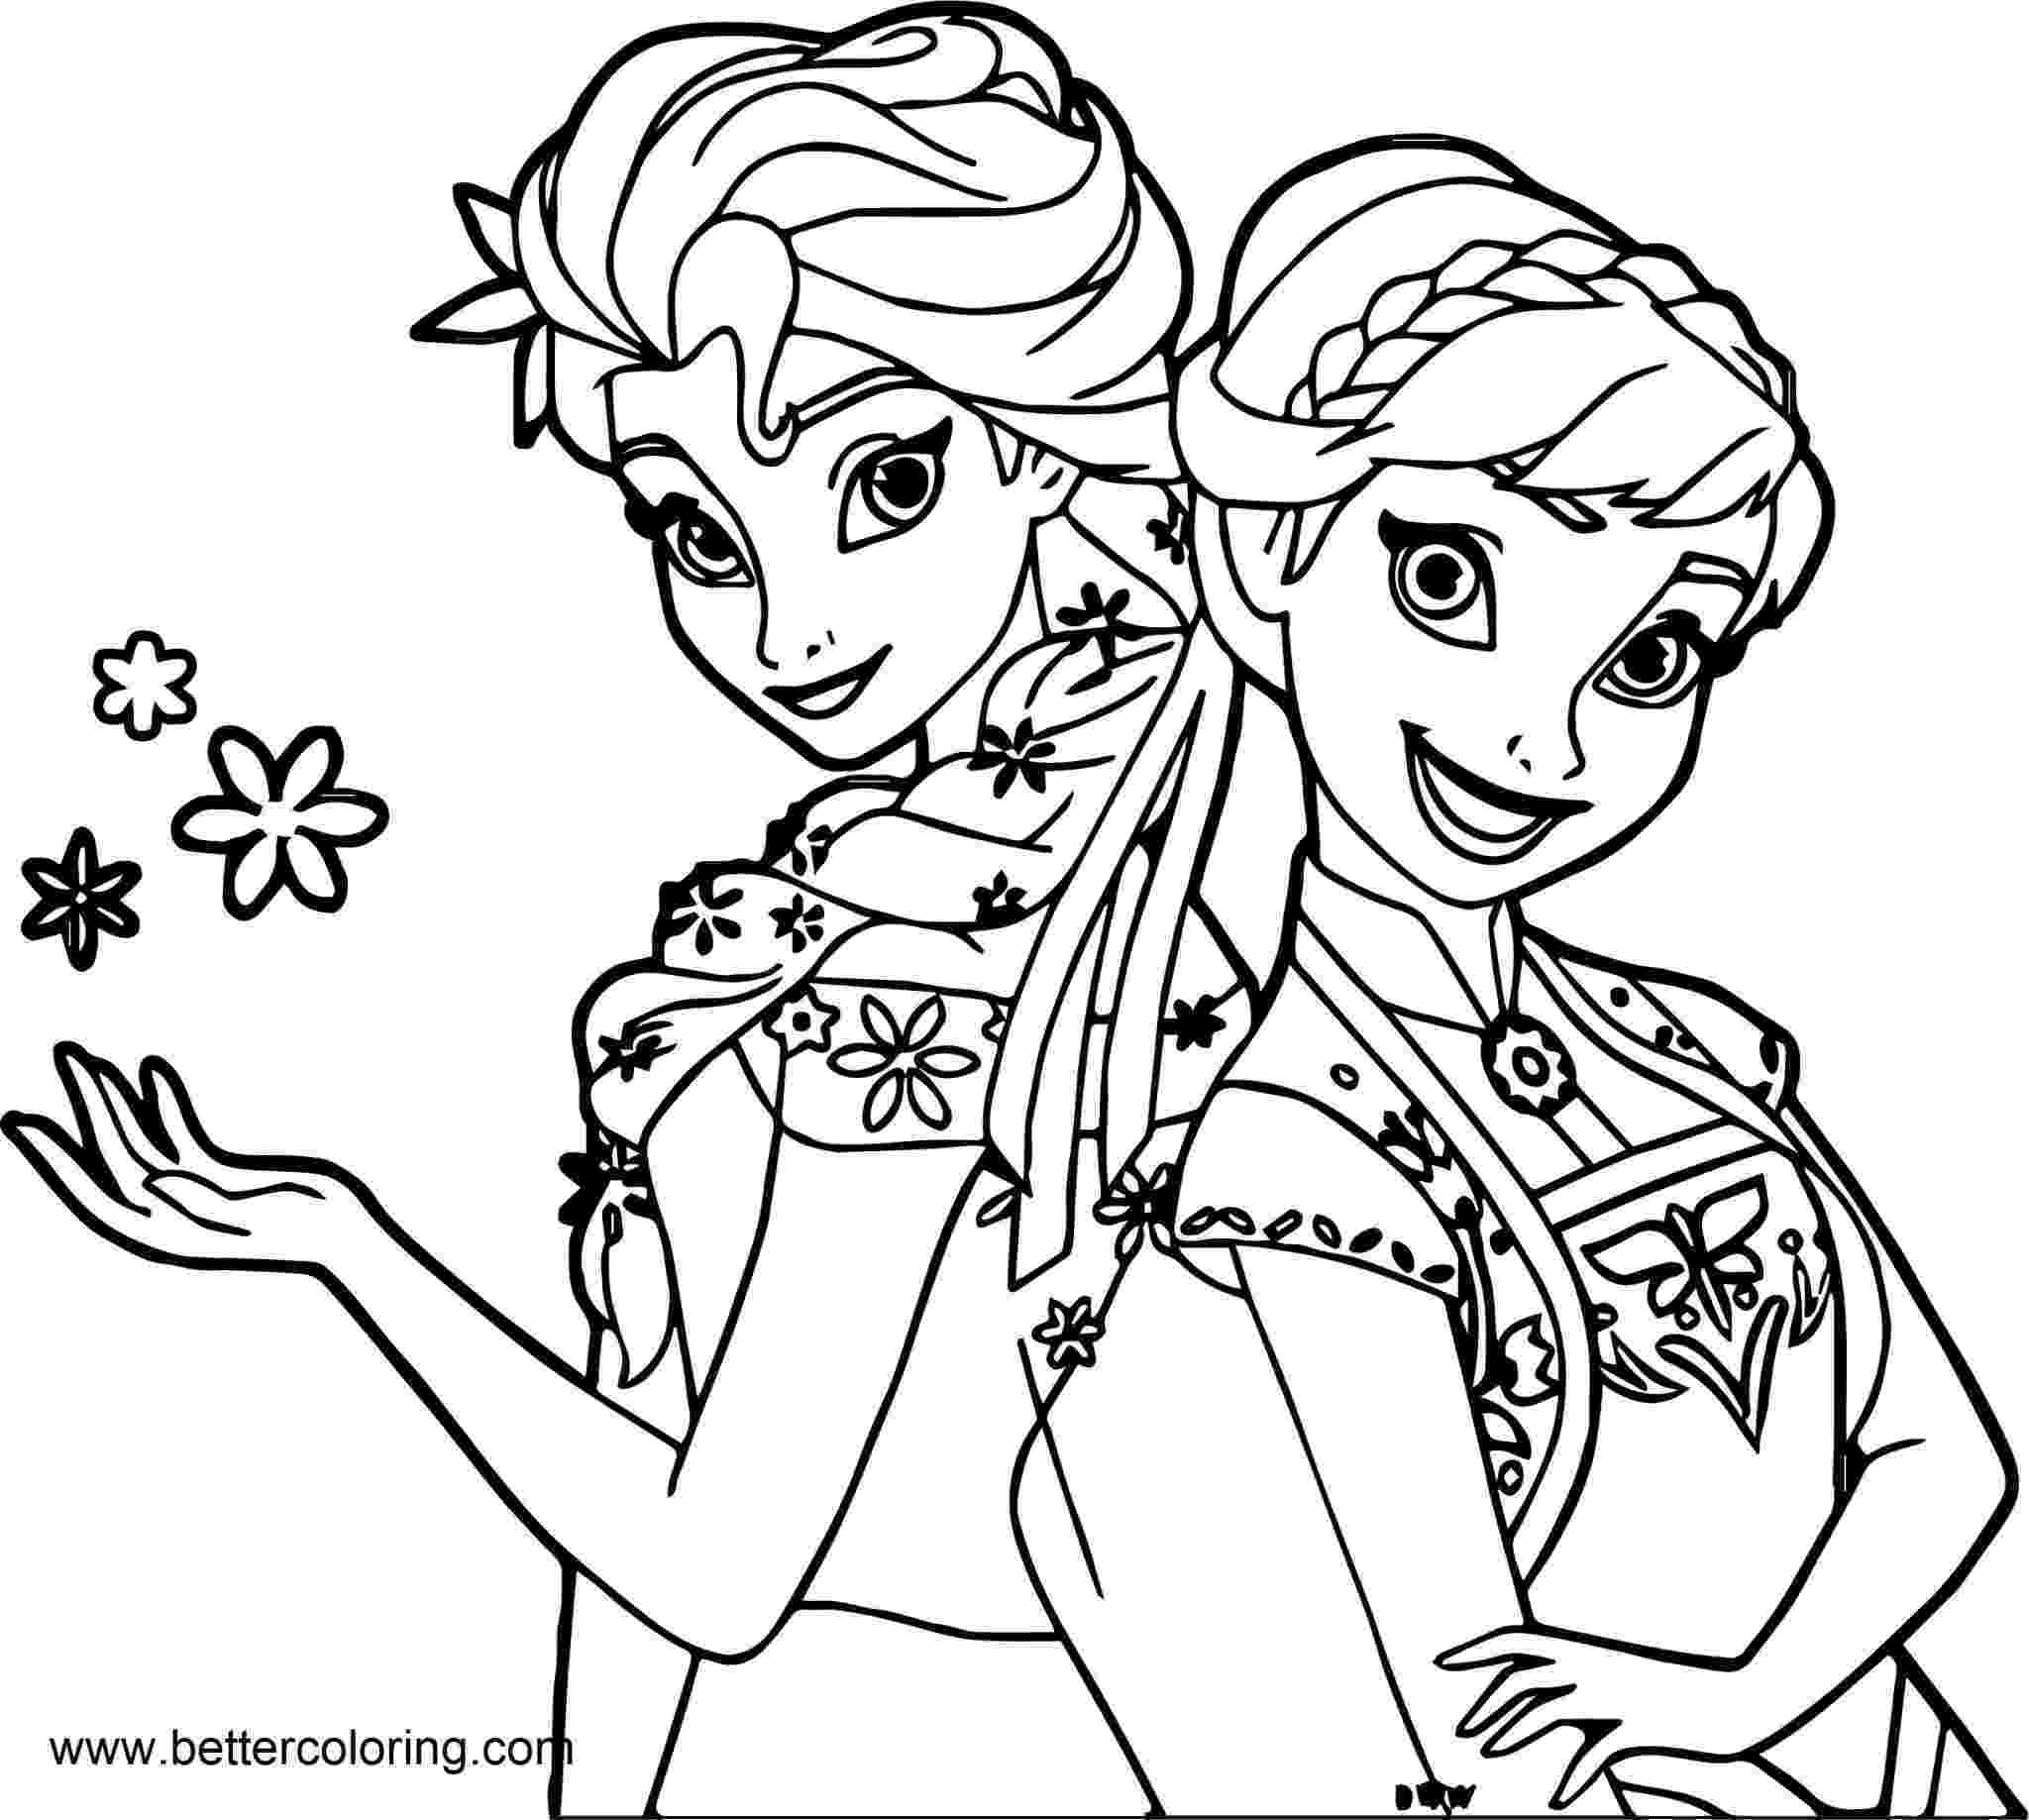 free coloring pages elsa and anna frozen elsa and anna coloring pages free printable elsa pages coloring and free anna 